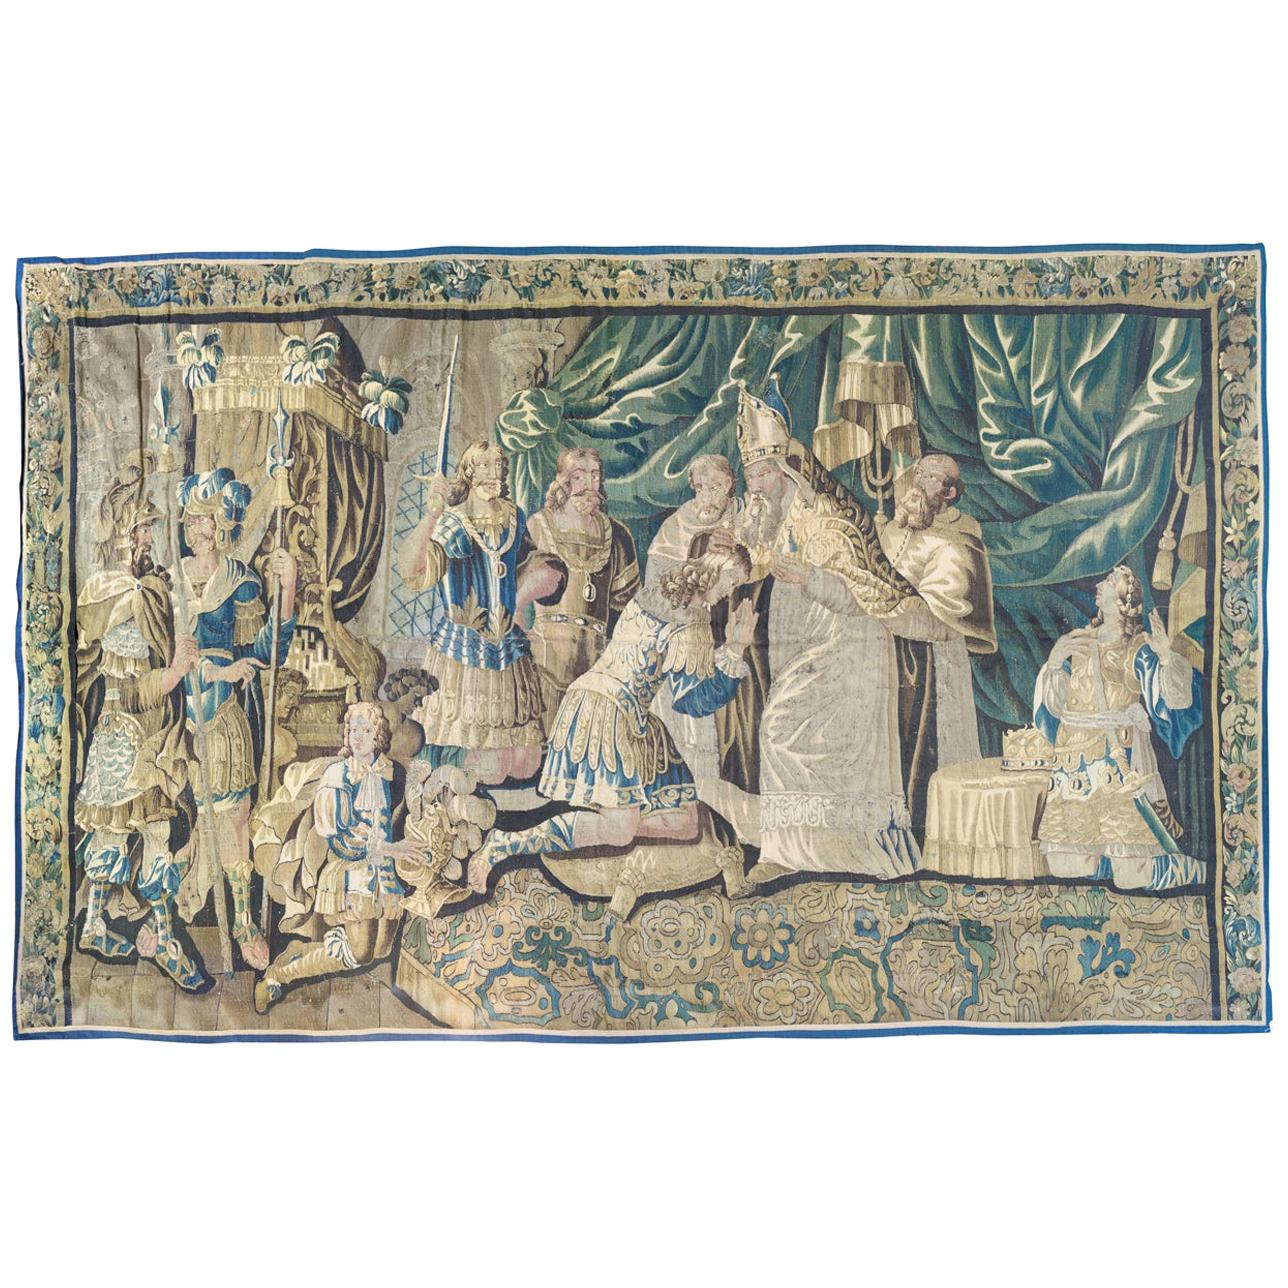 Large Antique 17th Century Flemish Religious Tapestry For Sale